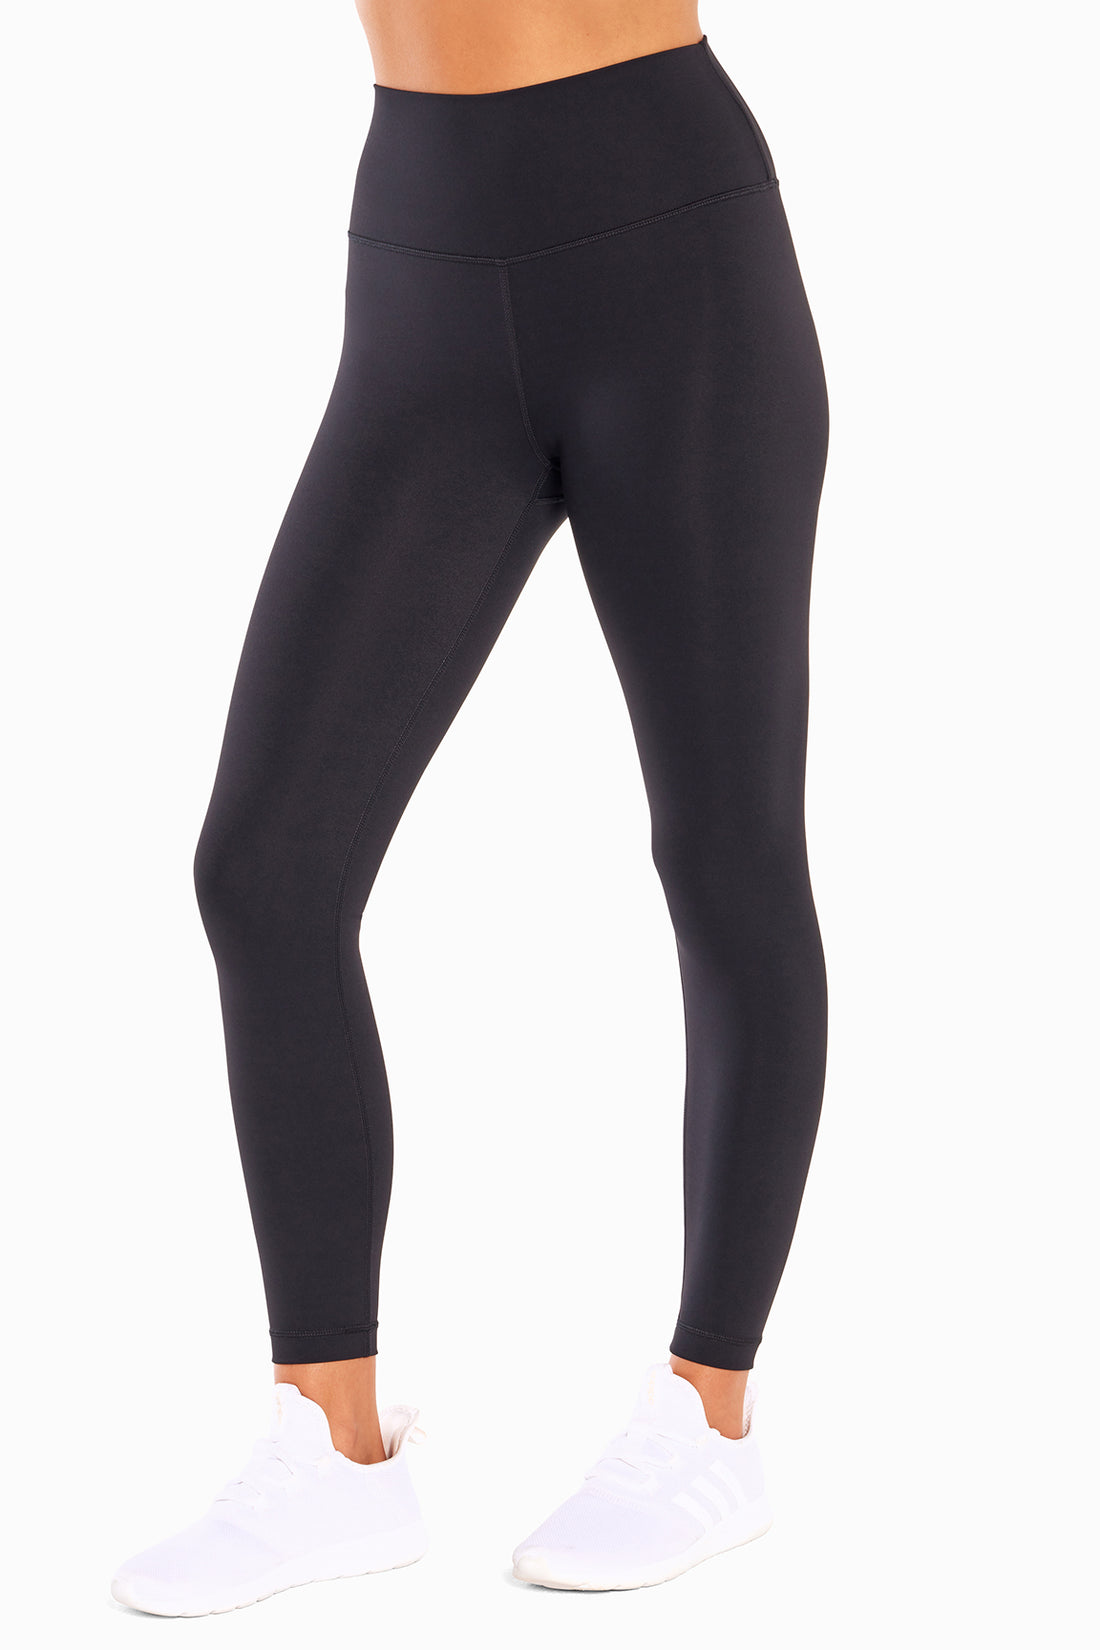 Eco-friendly Women's Leggings WILD FORREST E-store  - Polish  manufacturer of sportswear for fitness, Crossfit, gym, running. Quick  delivery and easy return and exchange